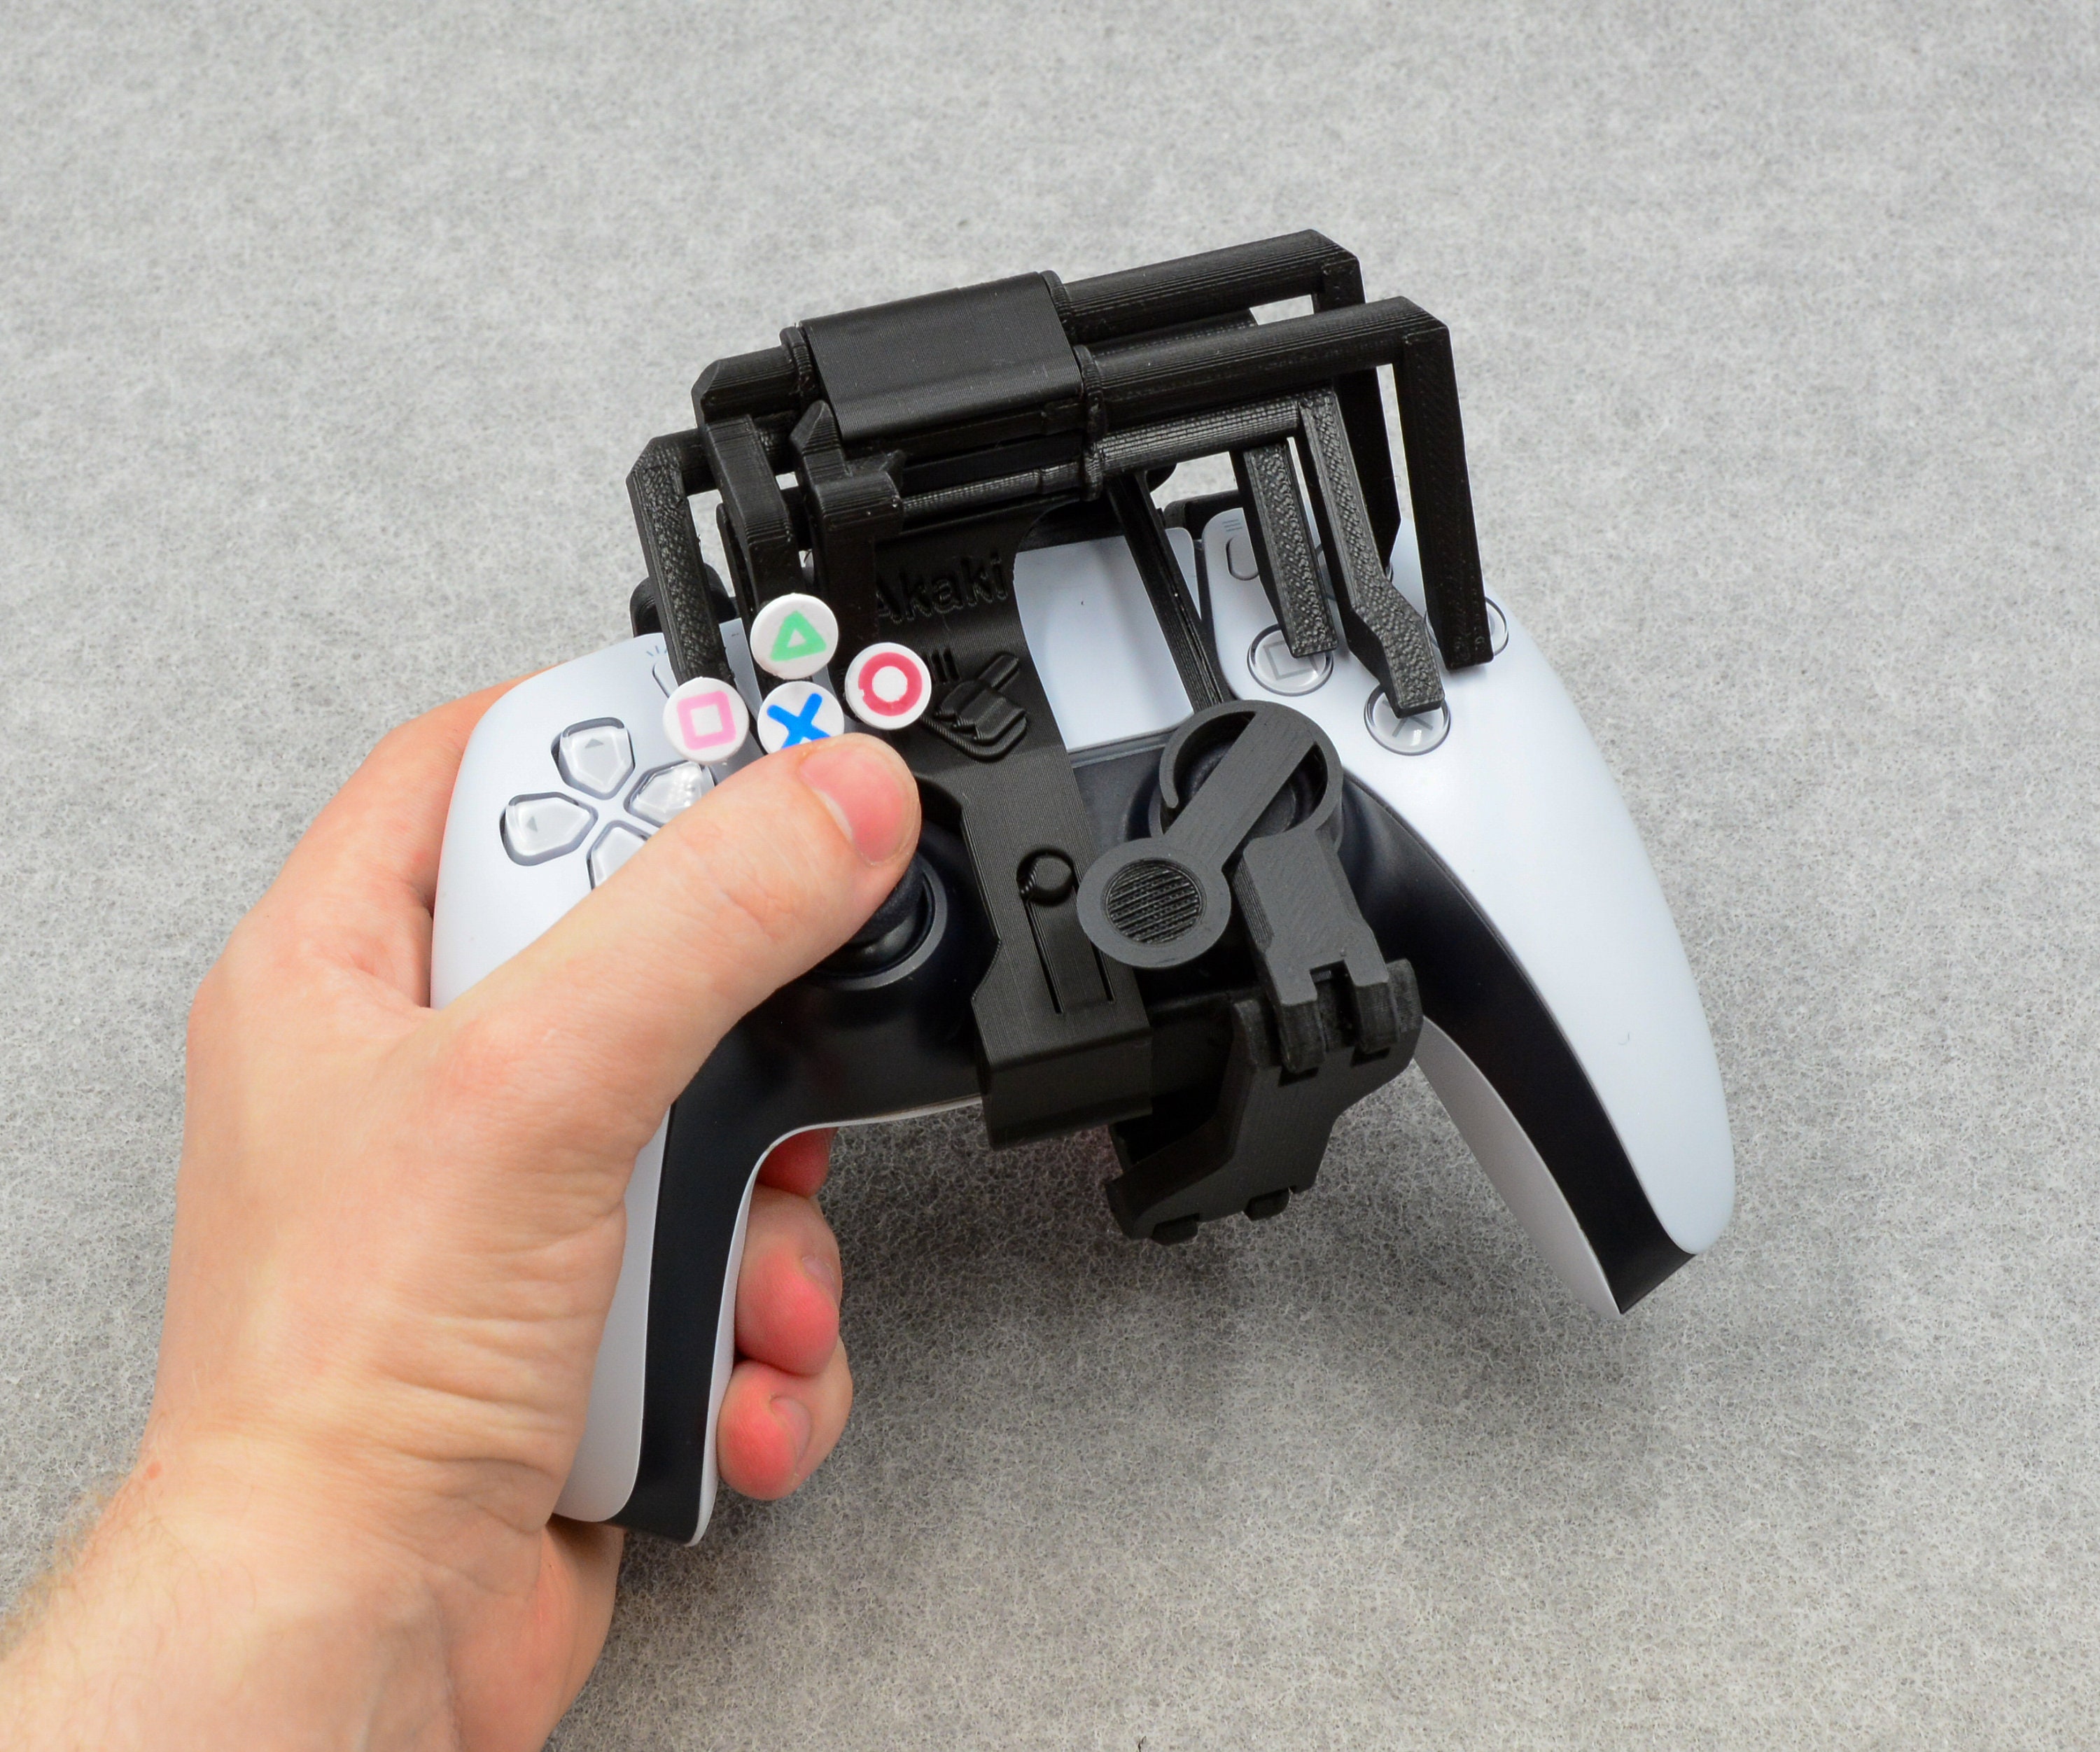 Color Shift Paint Changes Your Game Controllers